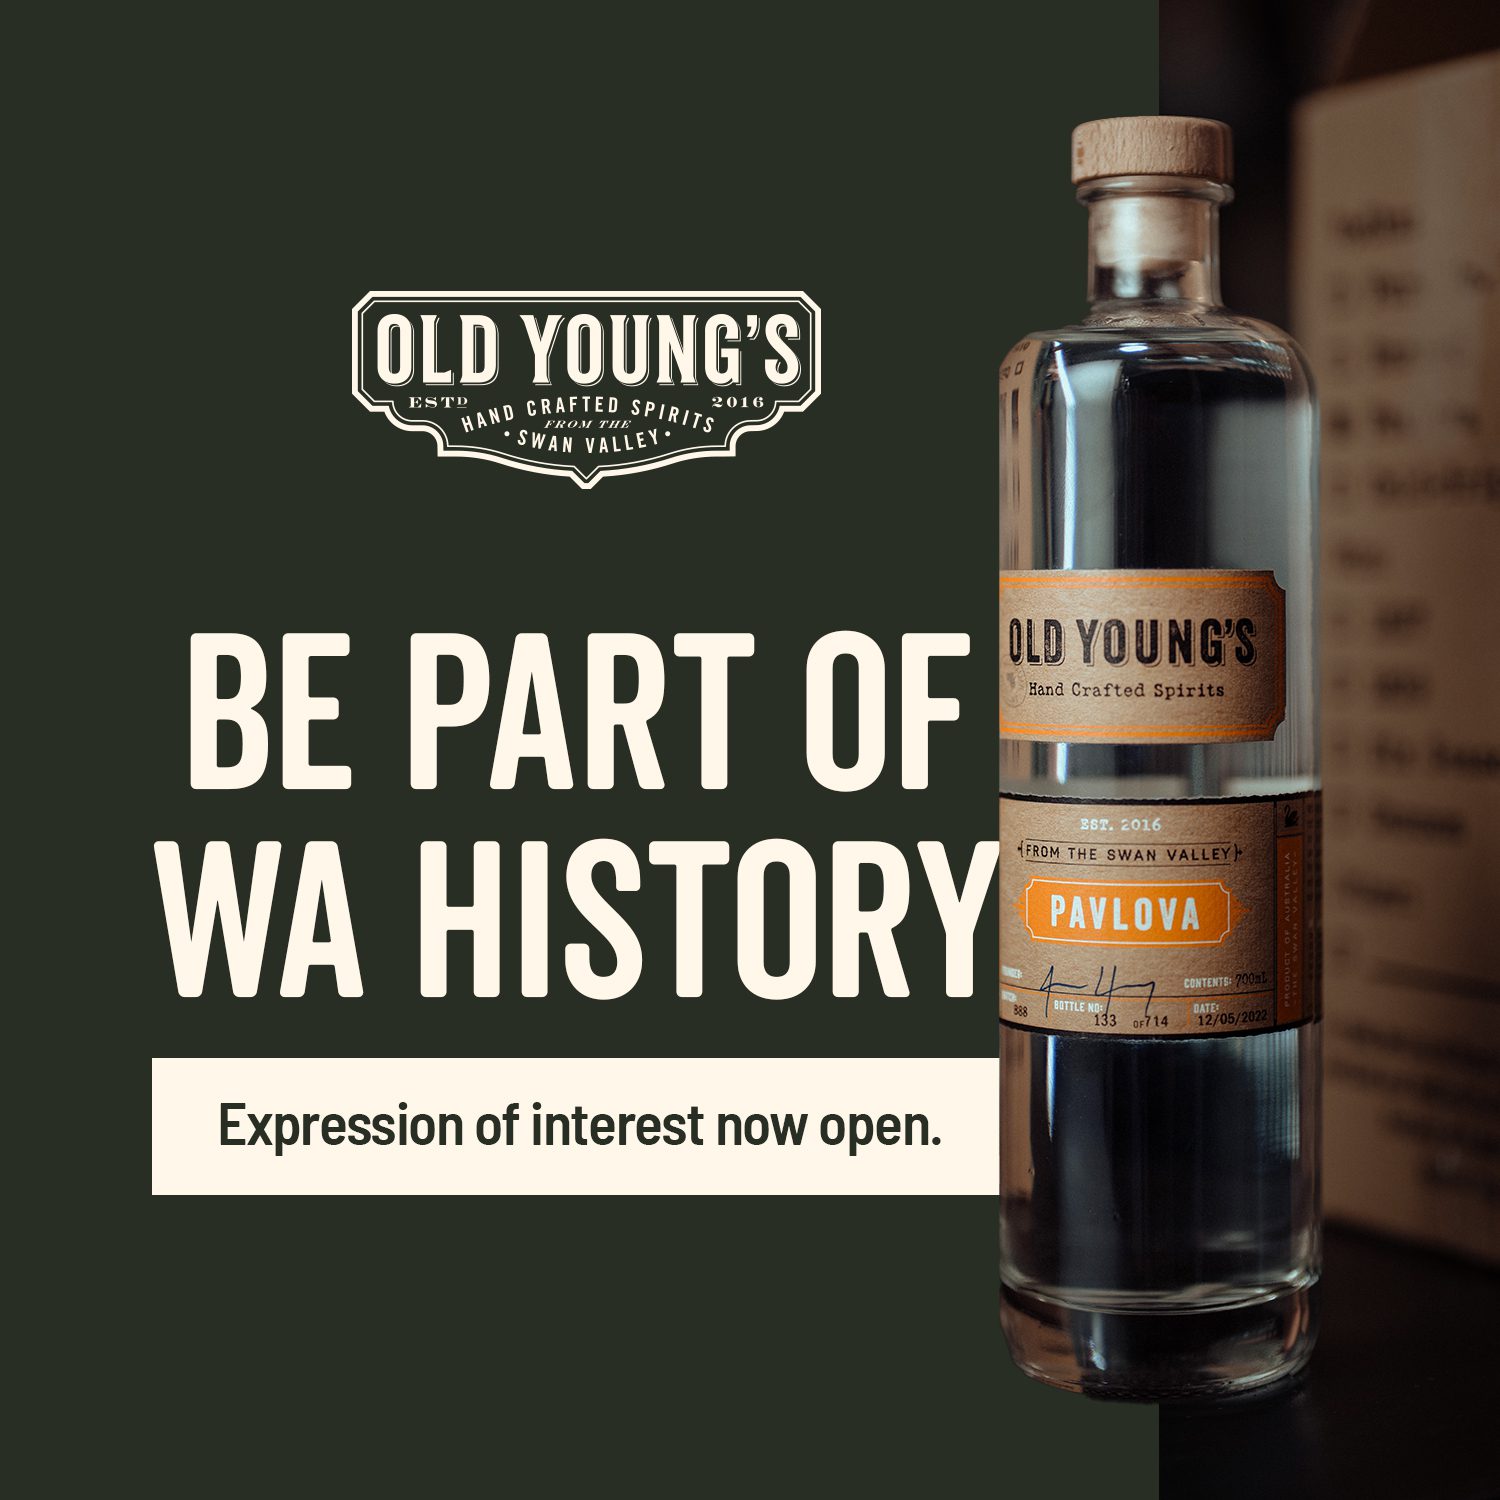 <p>The demand for craft spirits has skyrocketed in Australia over the last 10 years; investors clearly saw potential in Old Young’s and were eager to be a part of history.</p>
<p>Within 23 hours, Old Young’s reached their maximum target, raised a total of $2.7 million and welcomed 855 new investors.</p>
